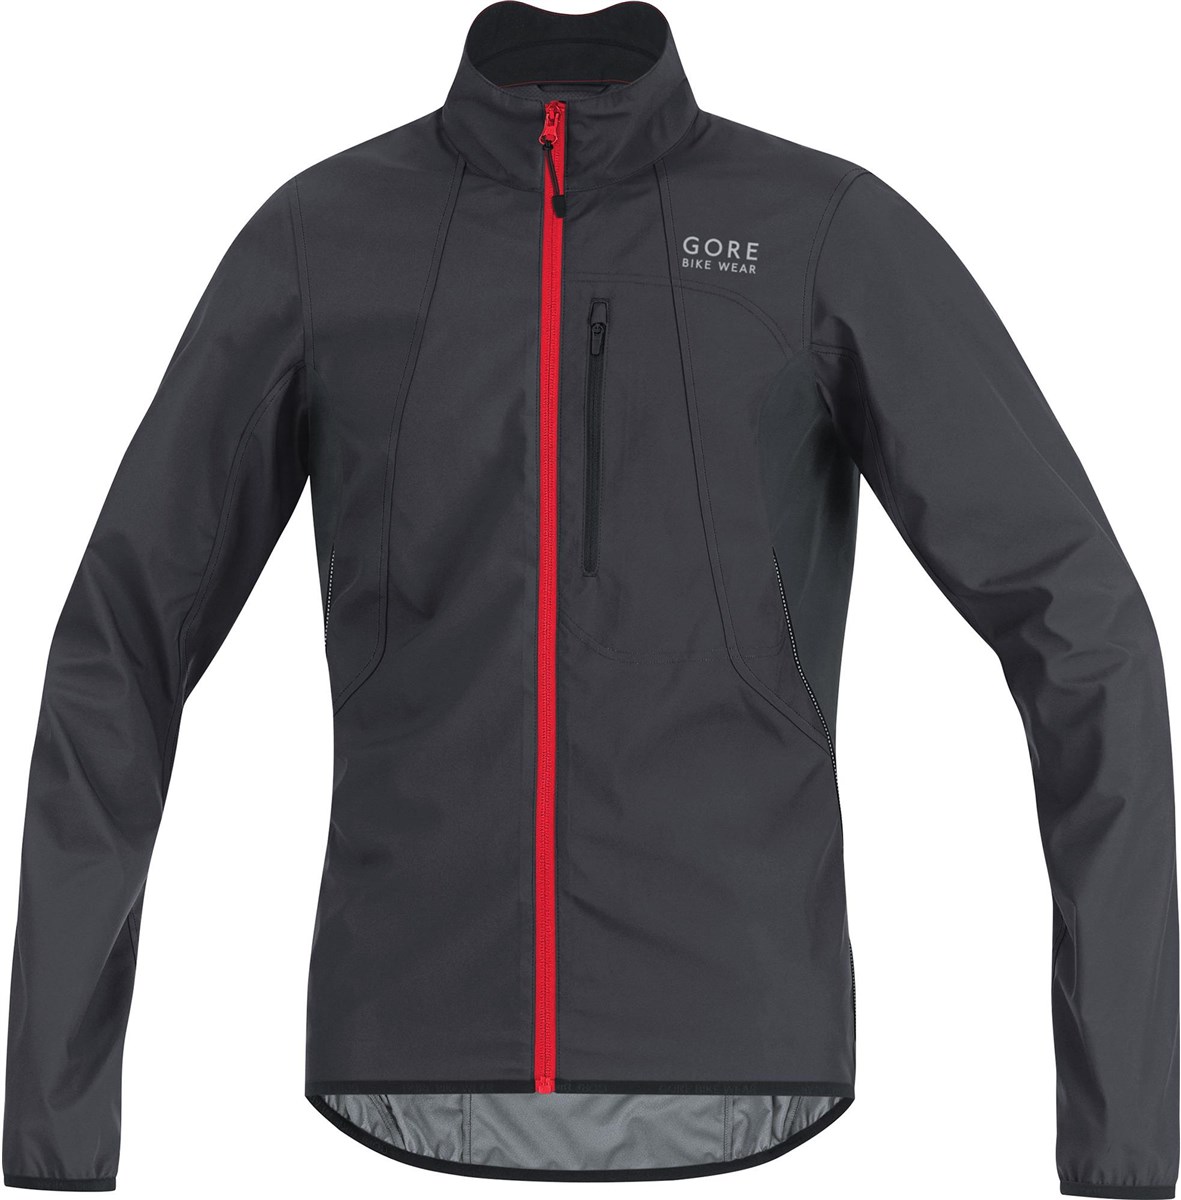 Gore E Gore Windstopper Jacket product image